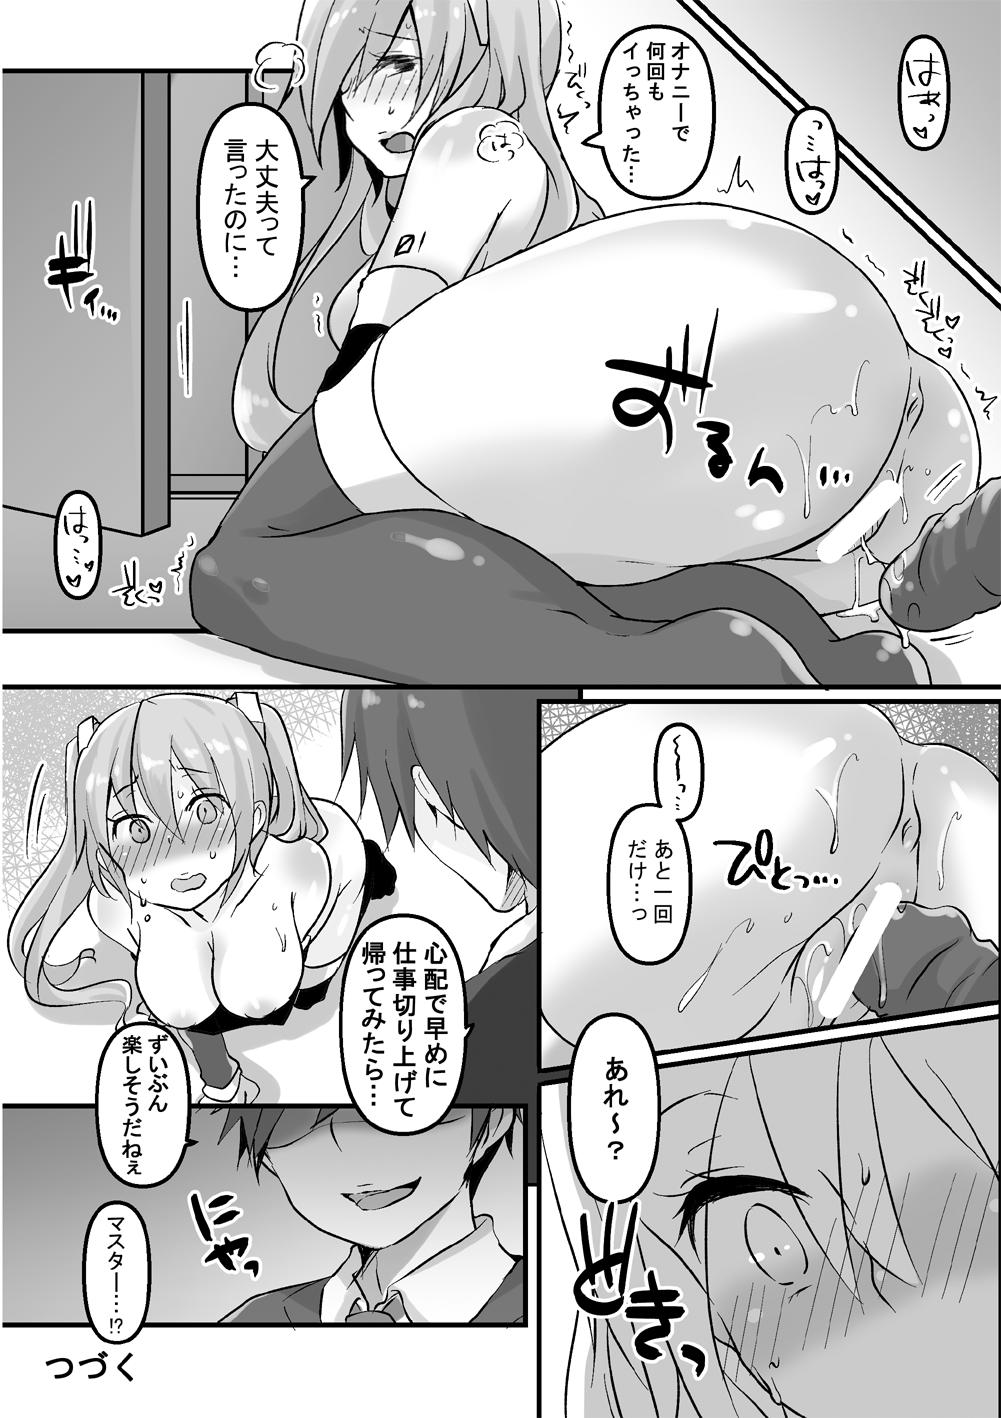 Bigtits C96 Omakebon. - Vocaloid Highschool - Page 6